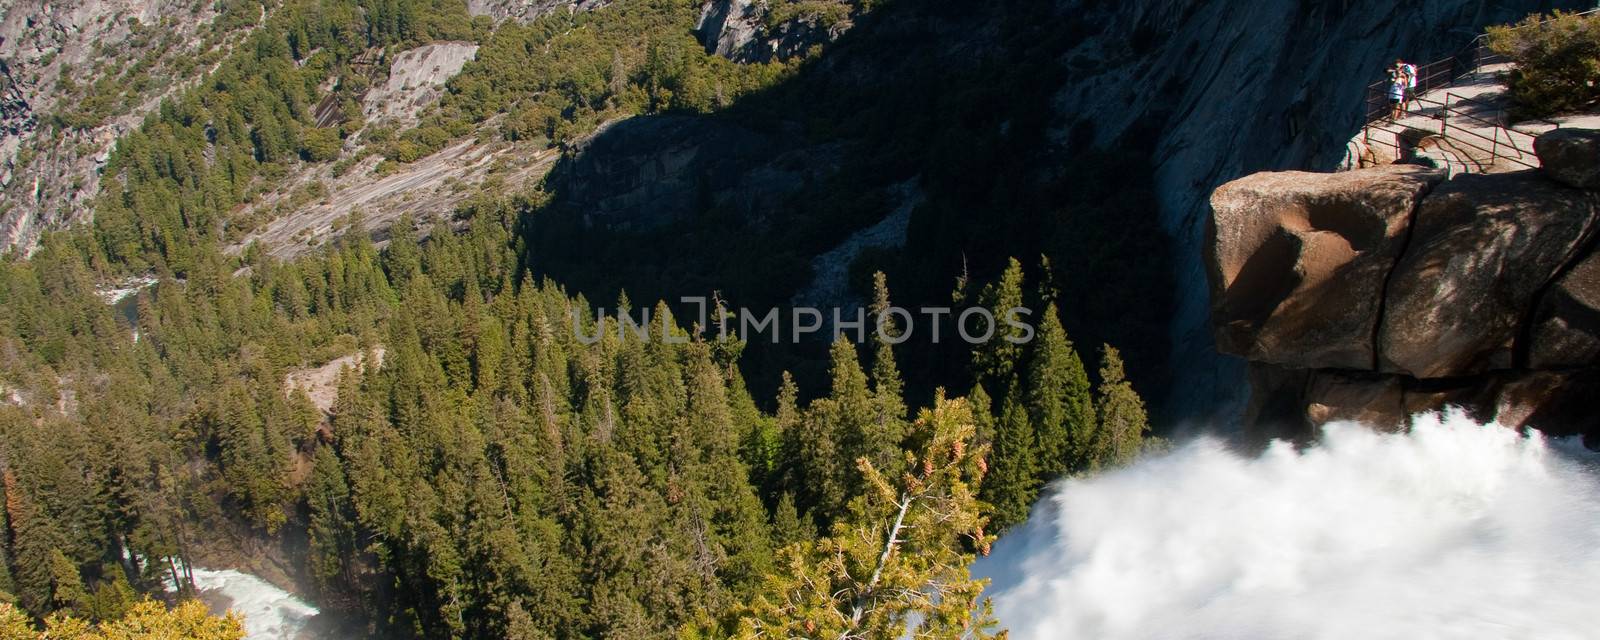 Scenic view of cascading waterfall in Yosemite National Park with forest in background, California, U.S.A.